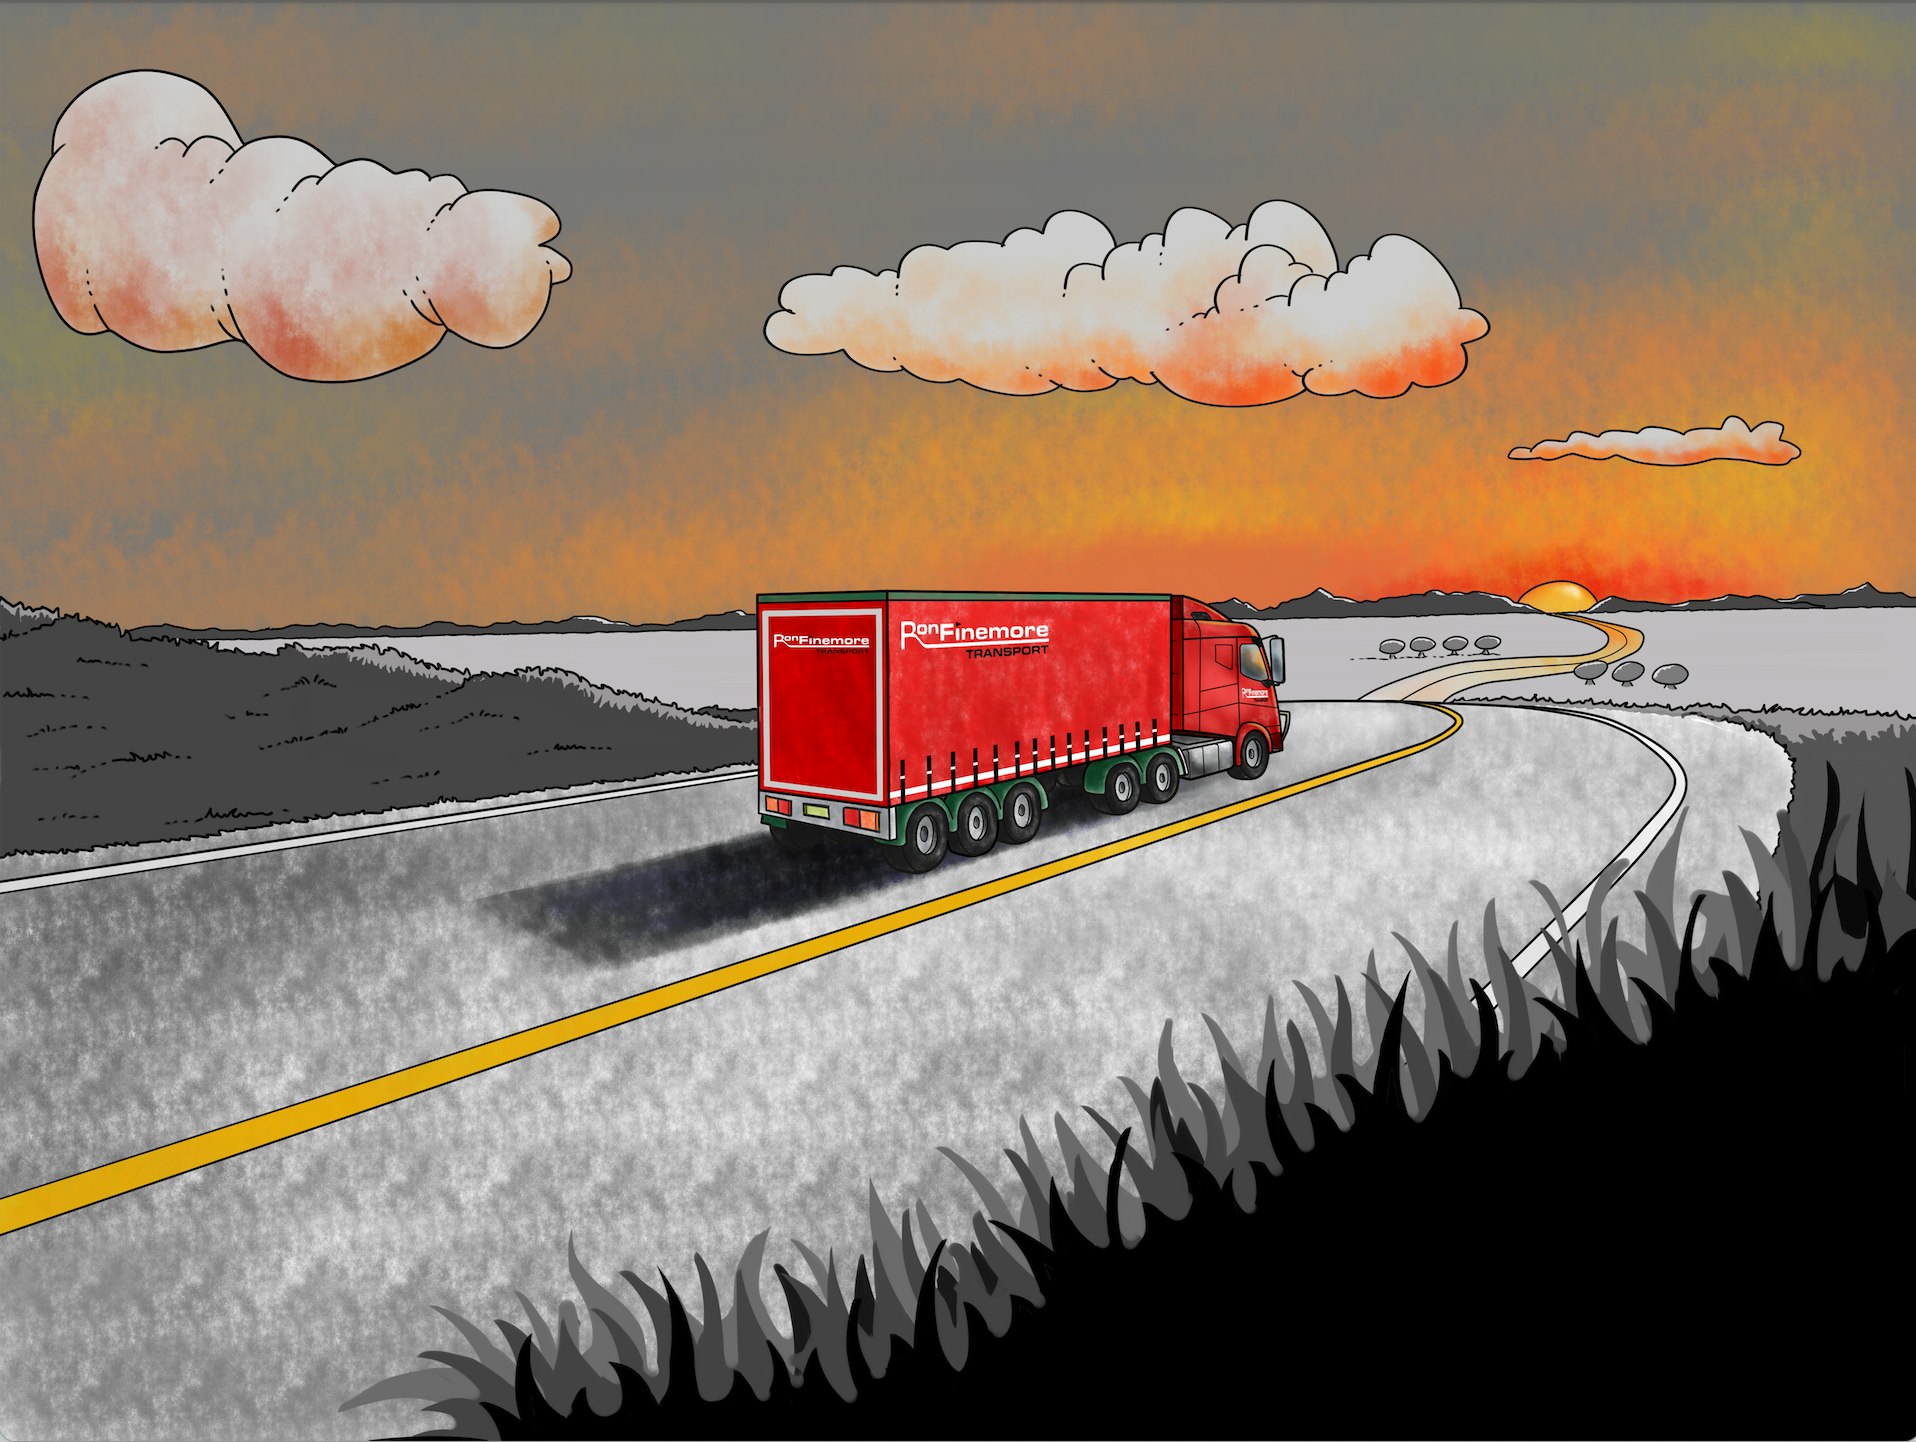 Ron Finemore Transport truck drives into the sunset